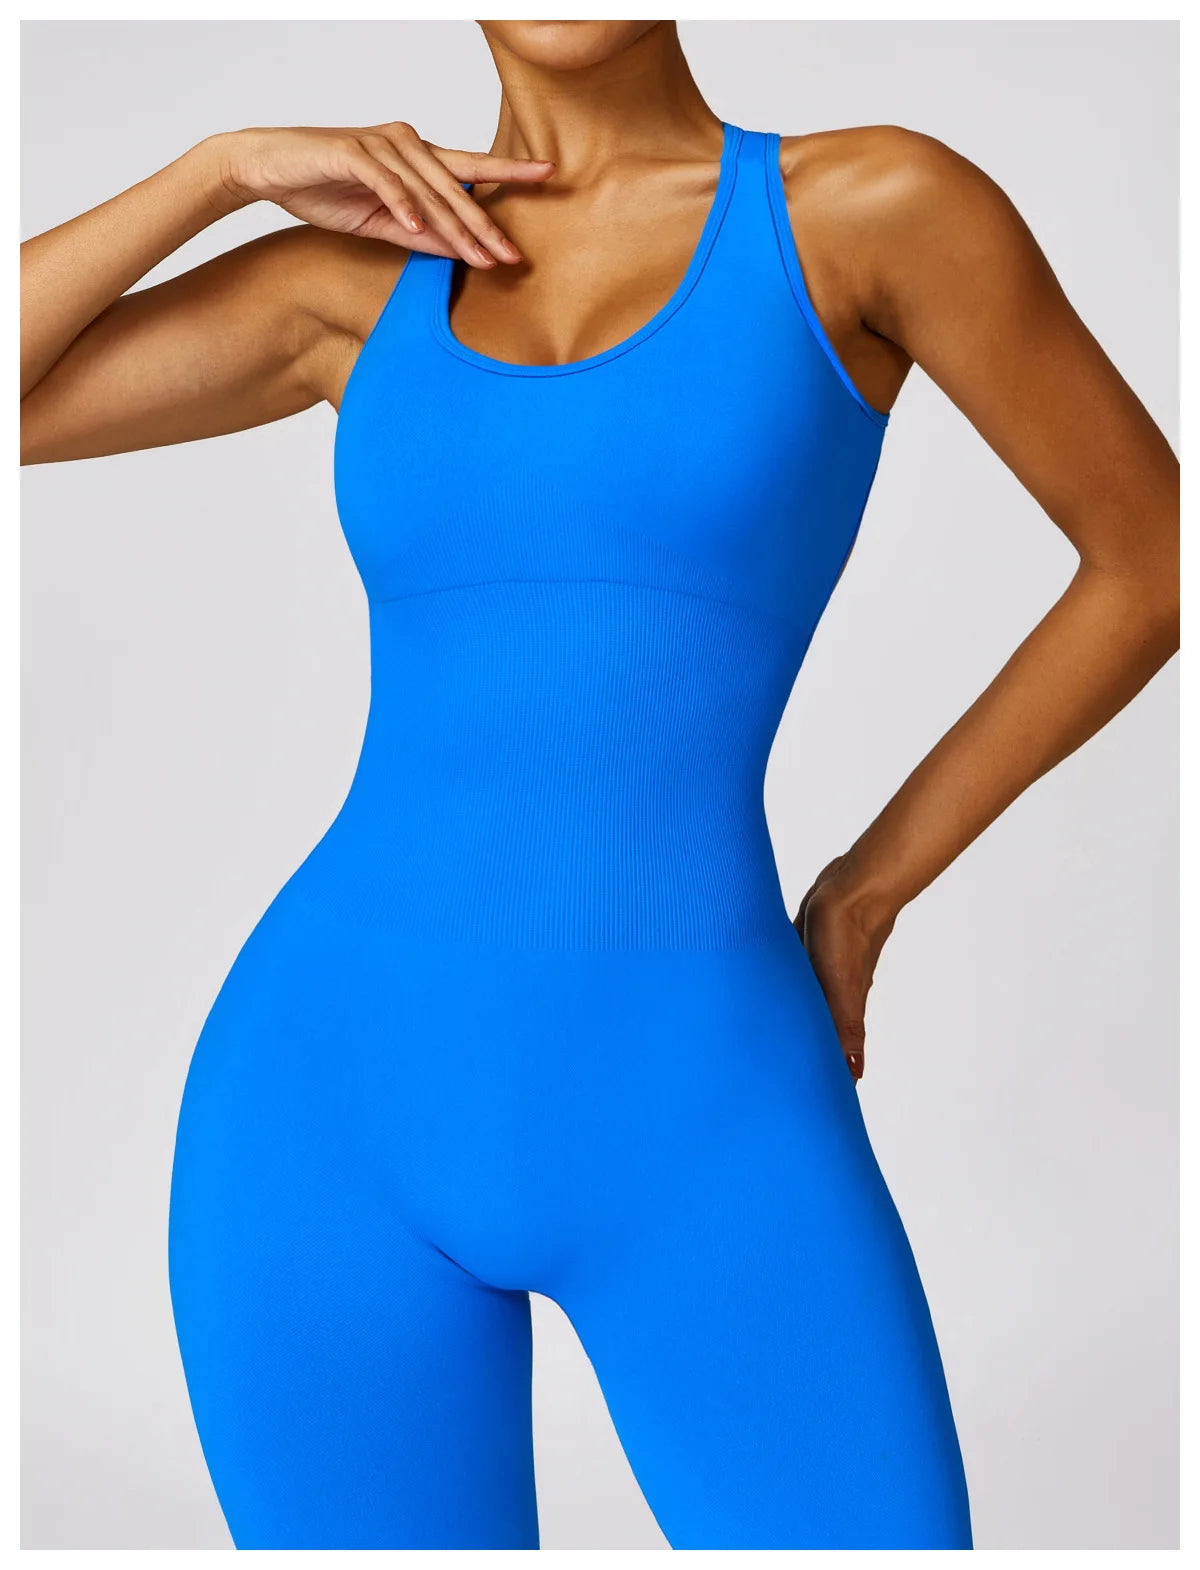 Seamless Gym Sport Jumpsuit Women Sportswear Hollow Backless Scrunch Fitness Overalls Push Up One Pieces Outfit Yoga Wear The Clothing Company Sydney